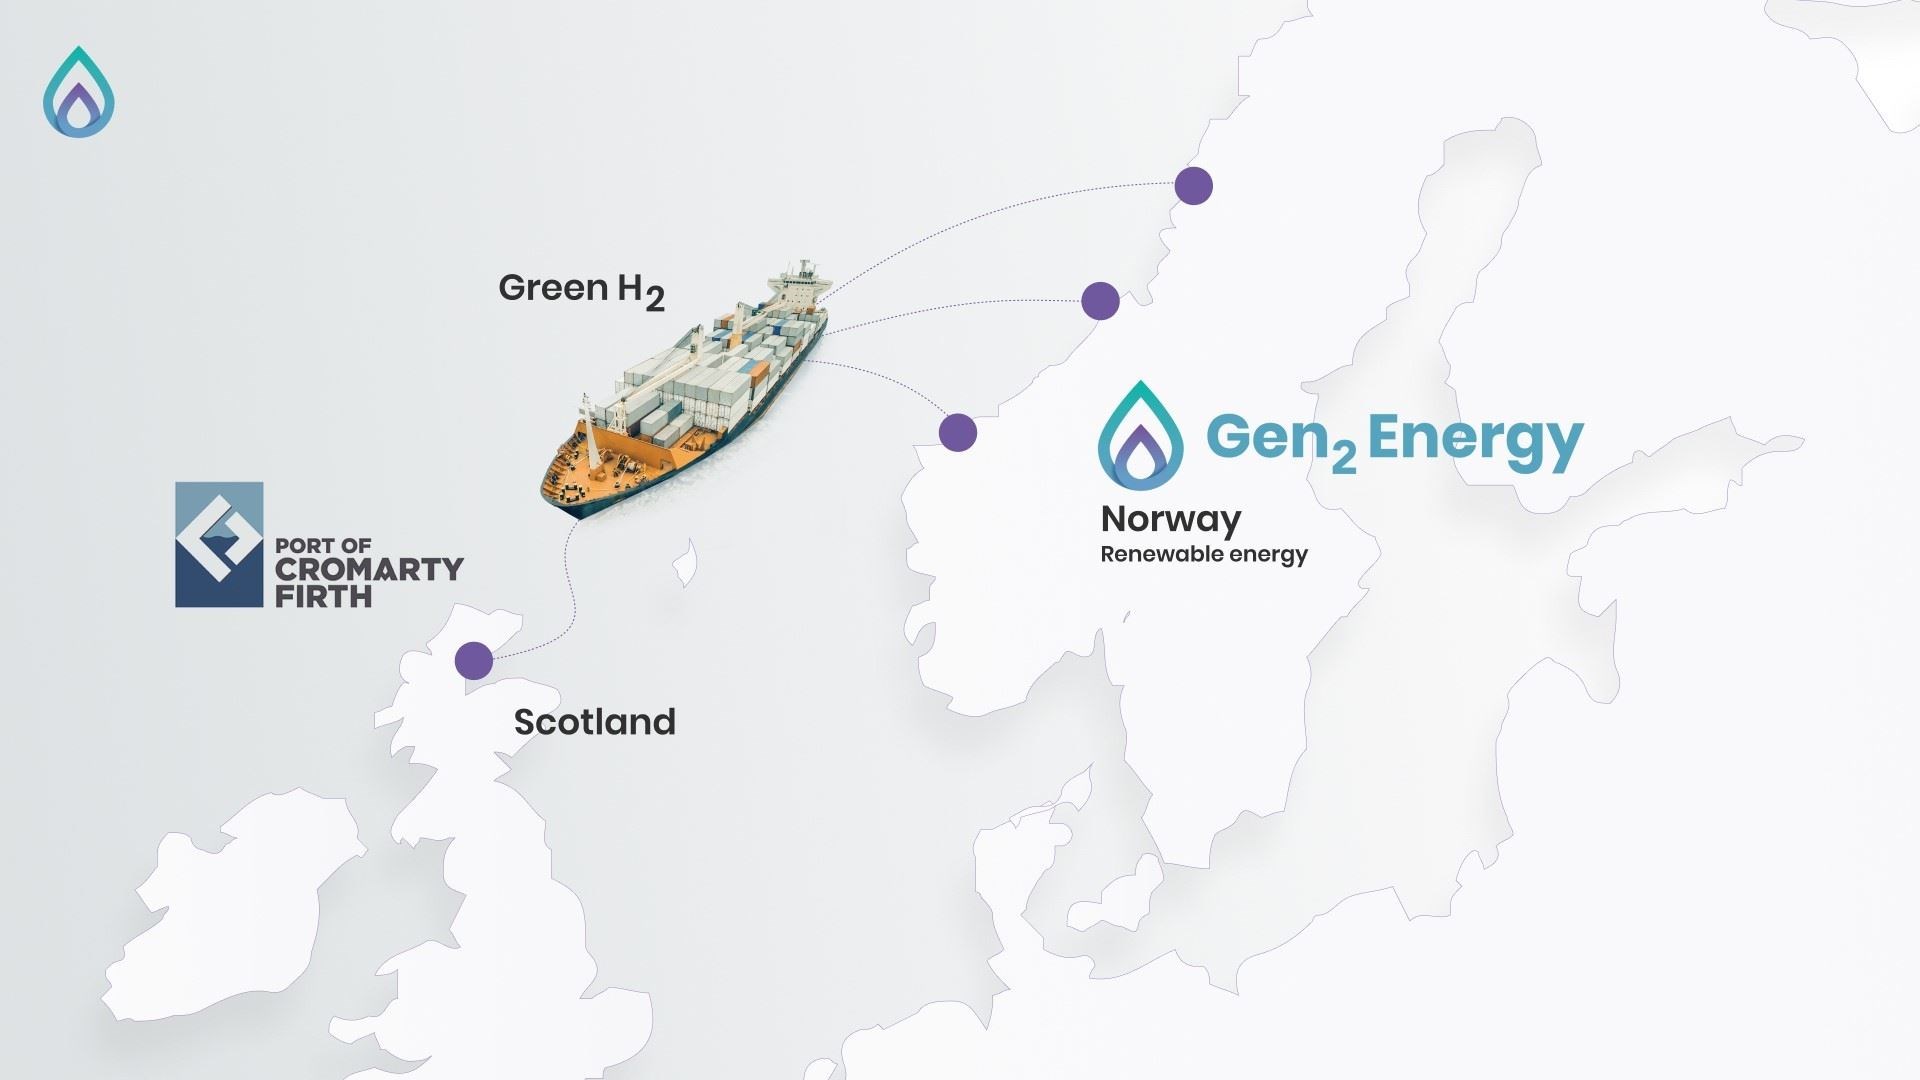 The plan is for hydrogen to be produced in Norway using surplus renewable energy, and then ship it to Invergordon for use in the UK market.